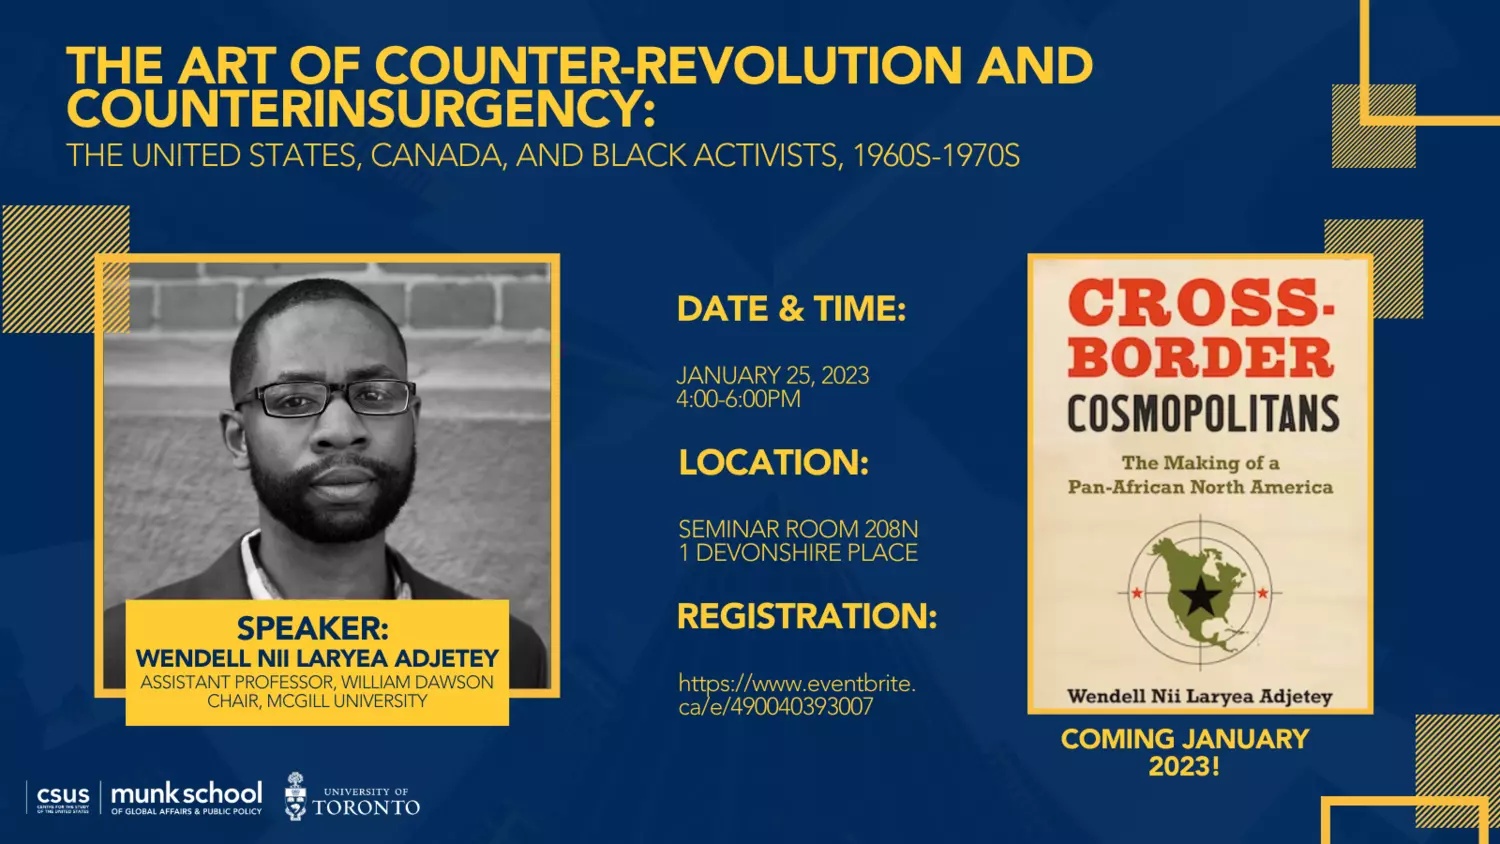 Event details with photo of Wendell Nii Laryea Adjetey and image of Cross Border Cosmopolitatans book cover art